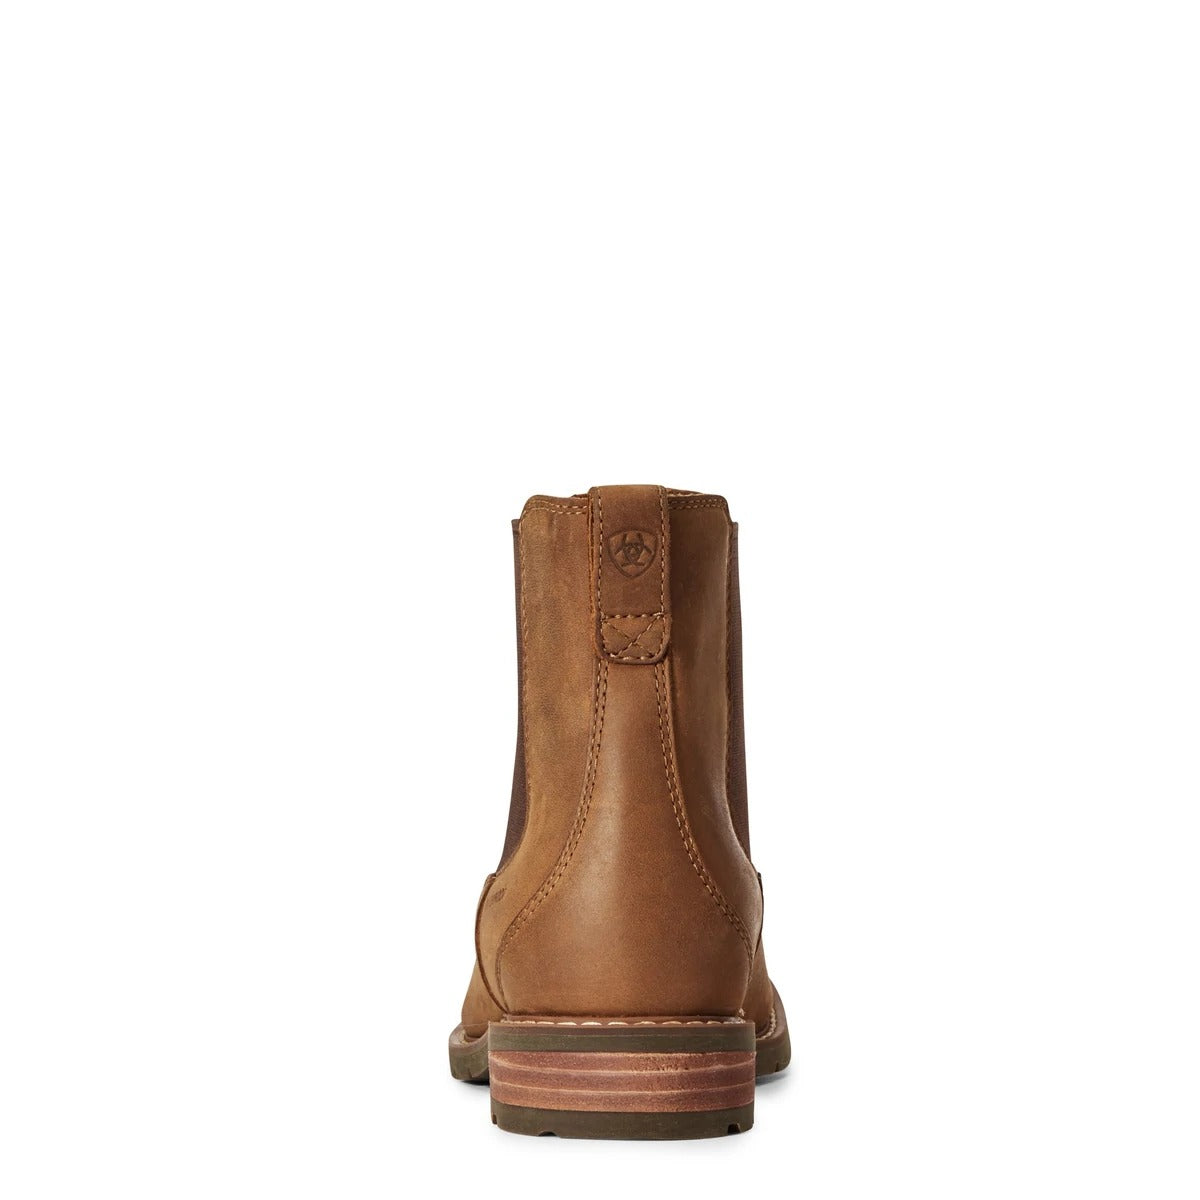 Ariat Women's Wexford H2O Weathered Brown